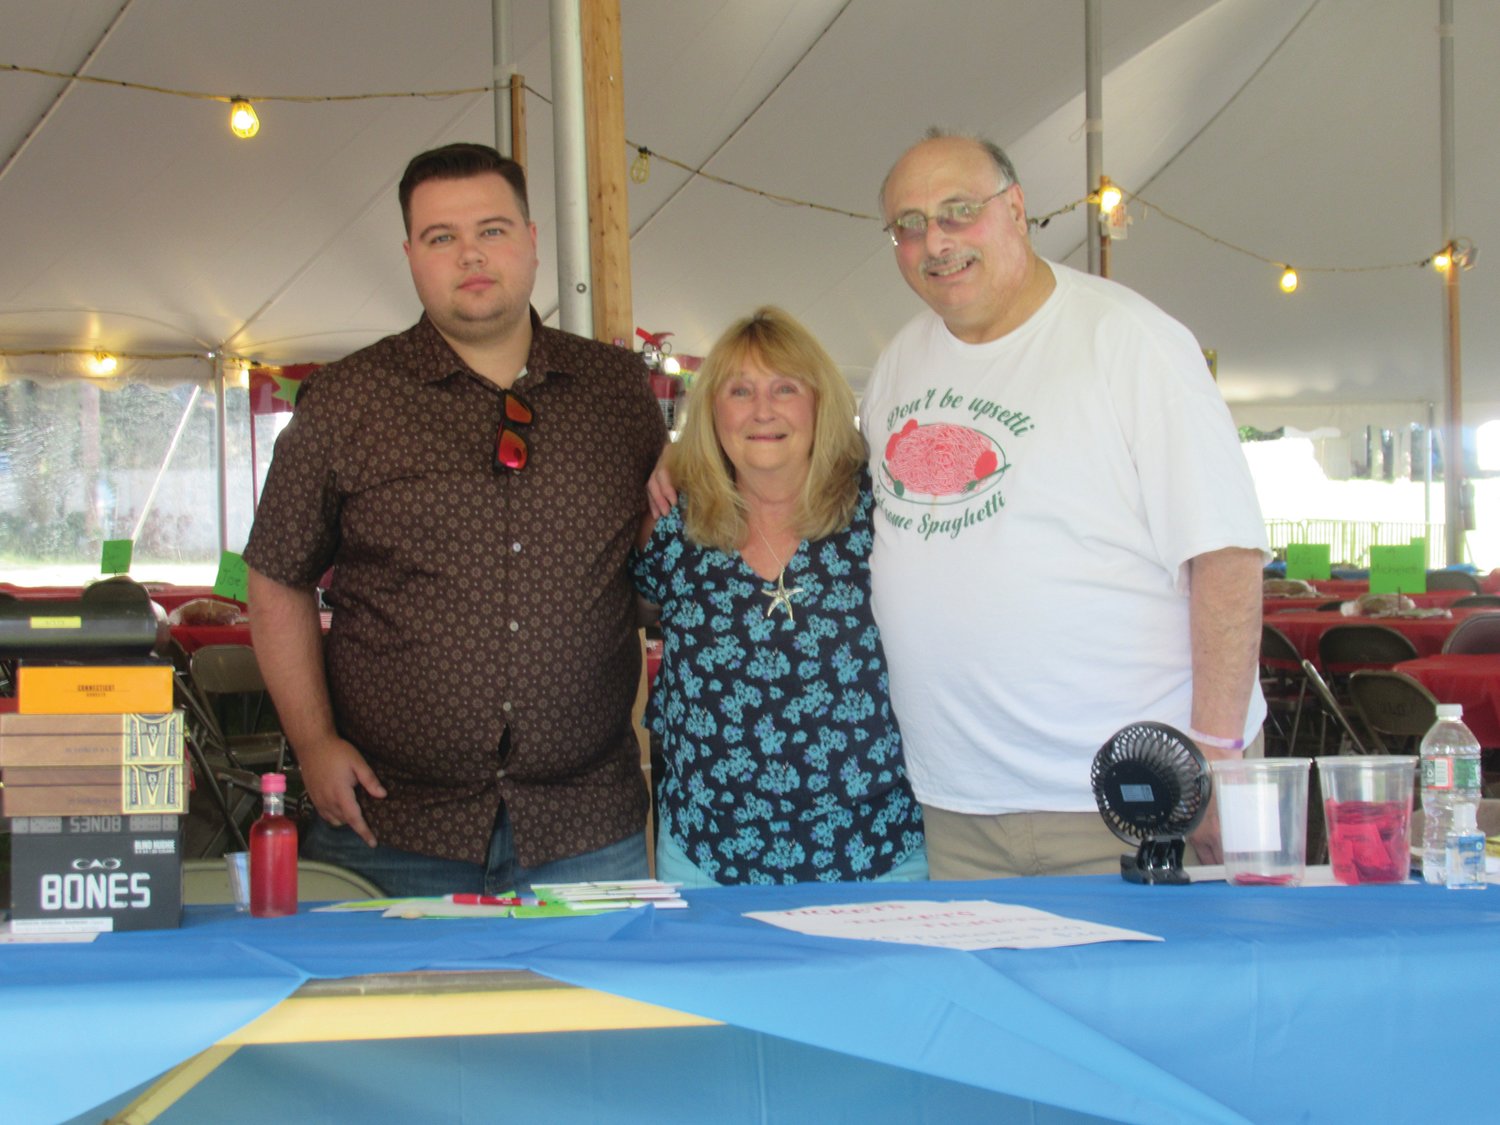 GRAND GREETERS: Darrien Martin, Linda Bessette and Joe Andreozzi welcomed nearly 170 people to OLG’s Steak and Cigar Night Saturday in Johnston.